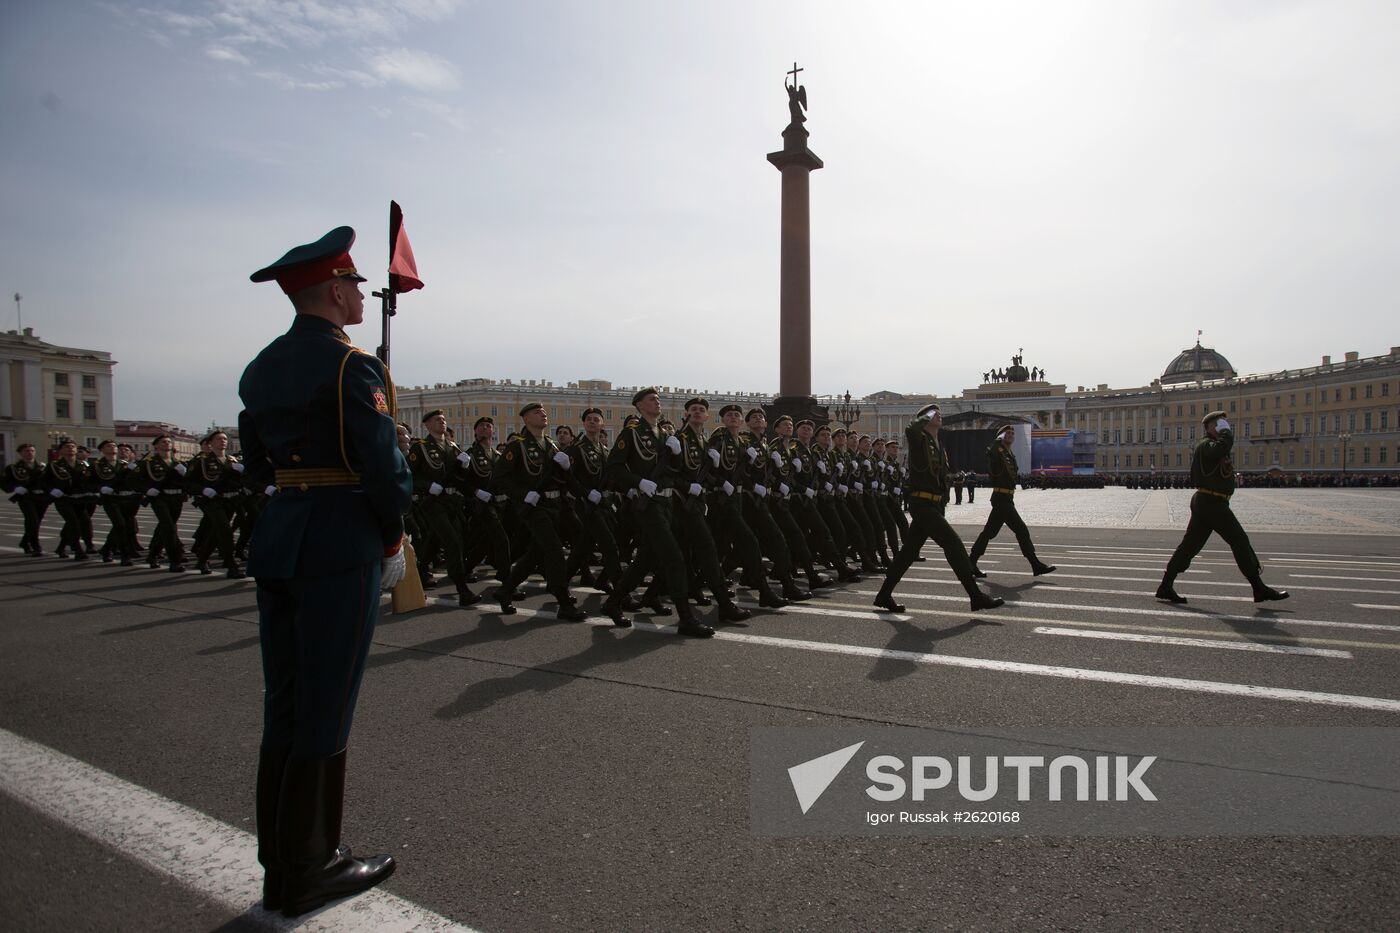 Final rehearsal of military parade to mark 70th anniversary of Victory in 1941-1945 Great Patriotic War in St. Petersburg